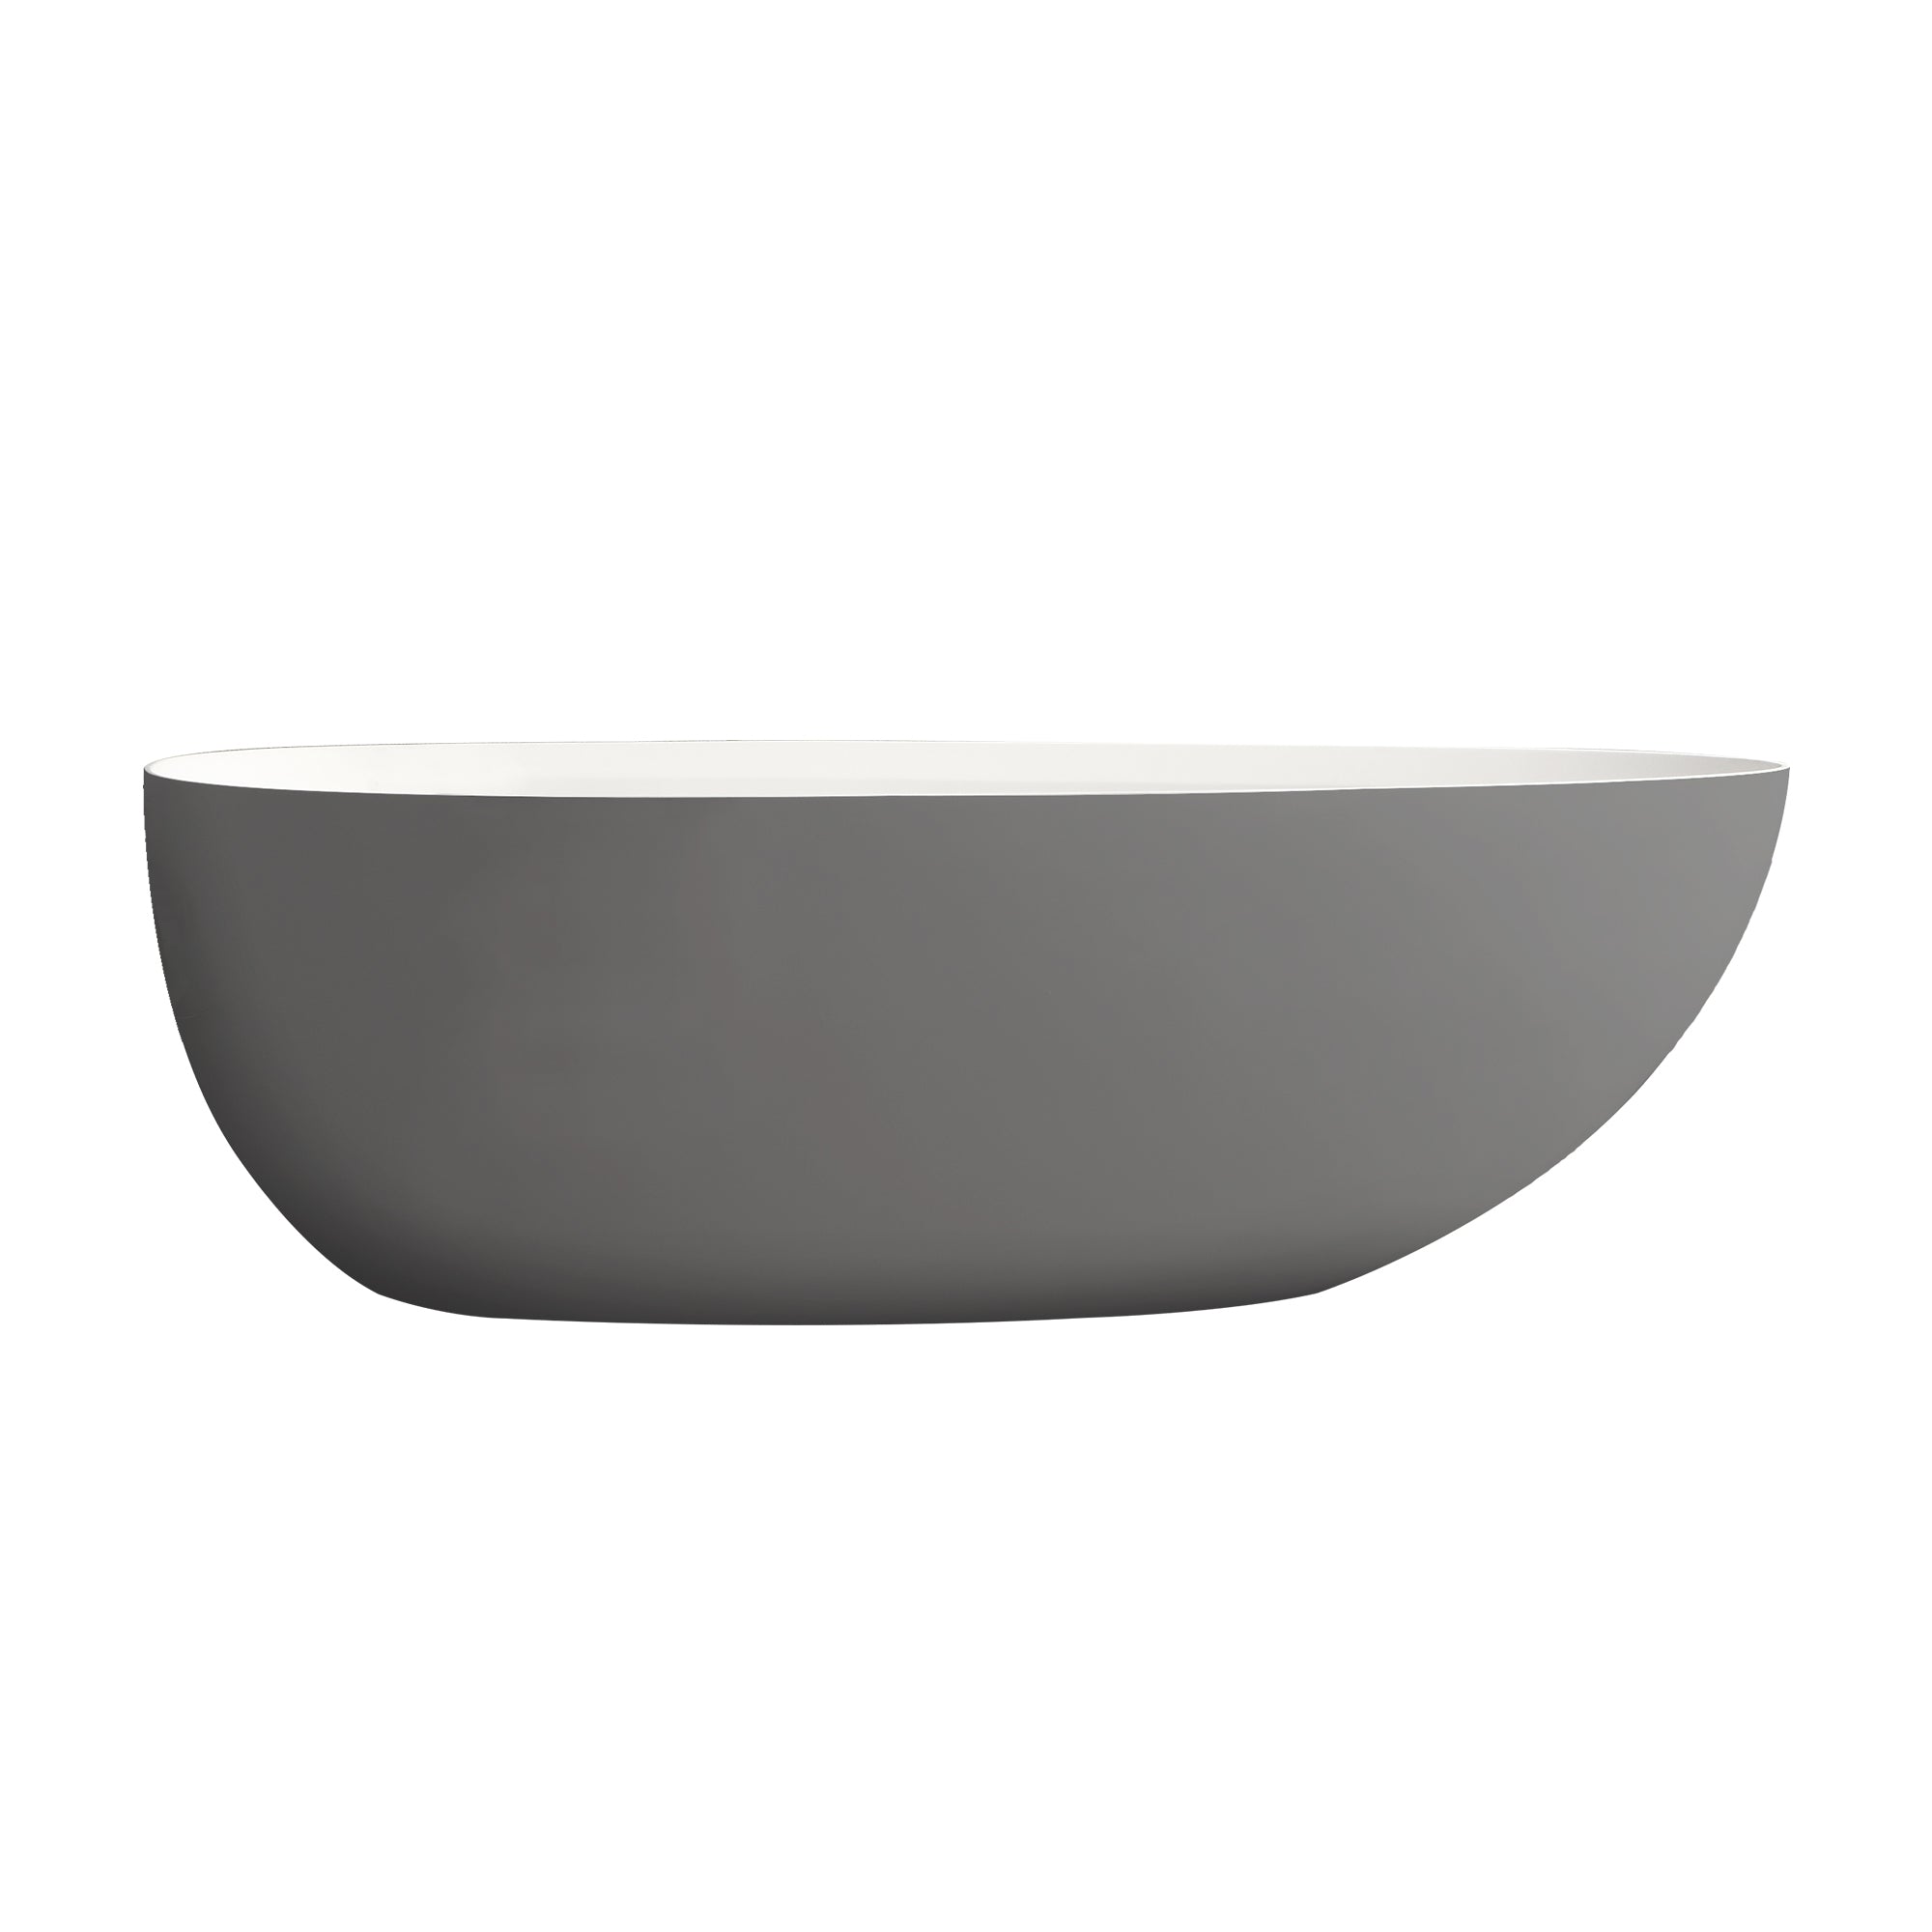 71" Egg Shaped Freestanding Solid Surface Soaking Bathtub with Overflow RX-S01-71GW